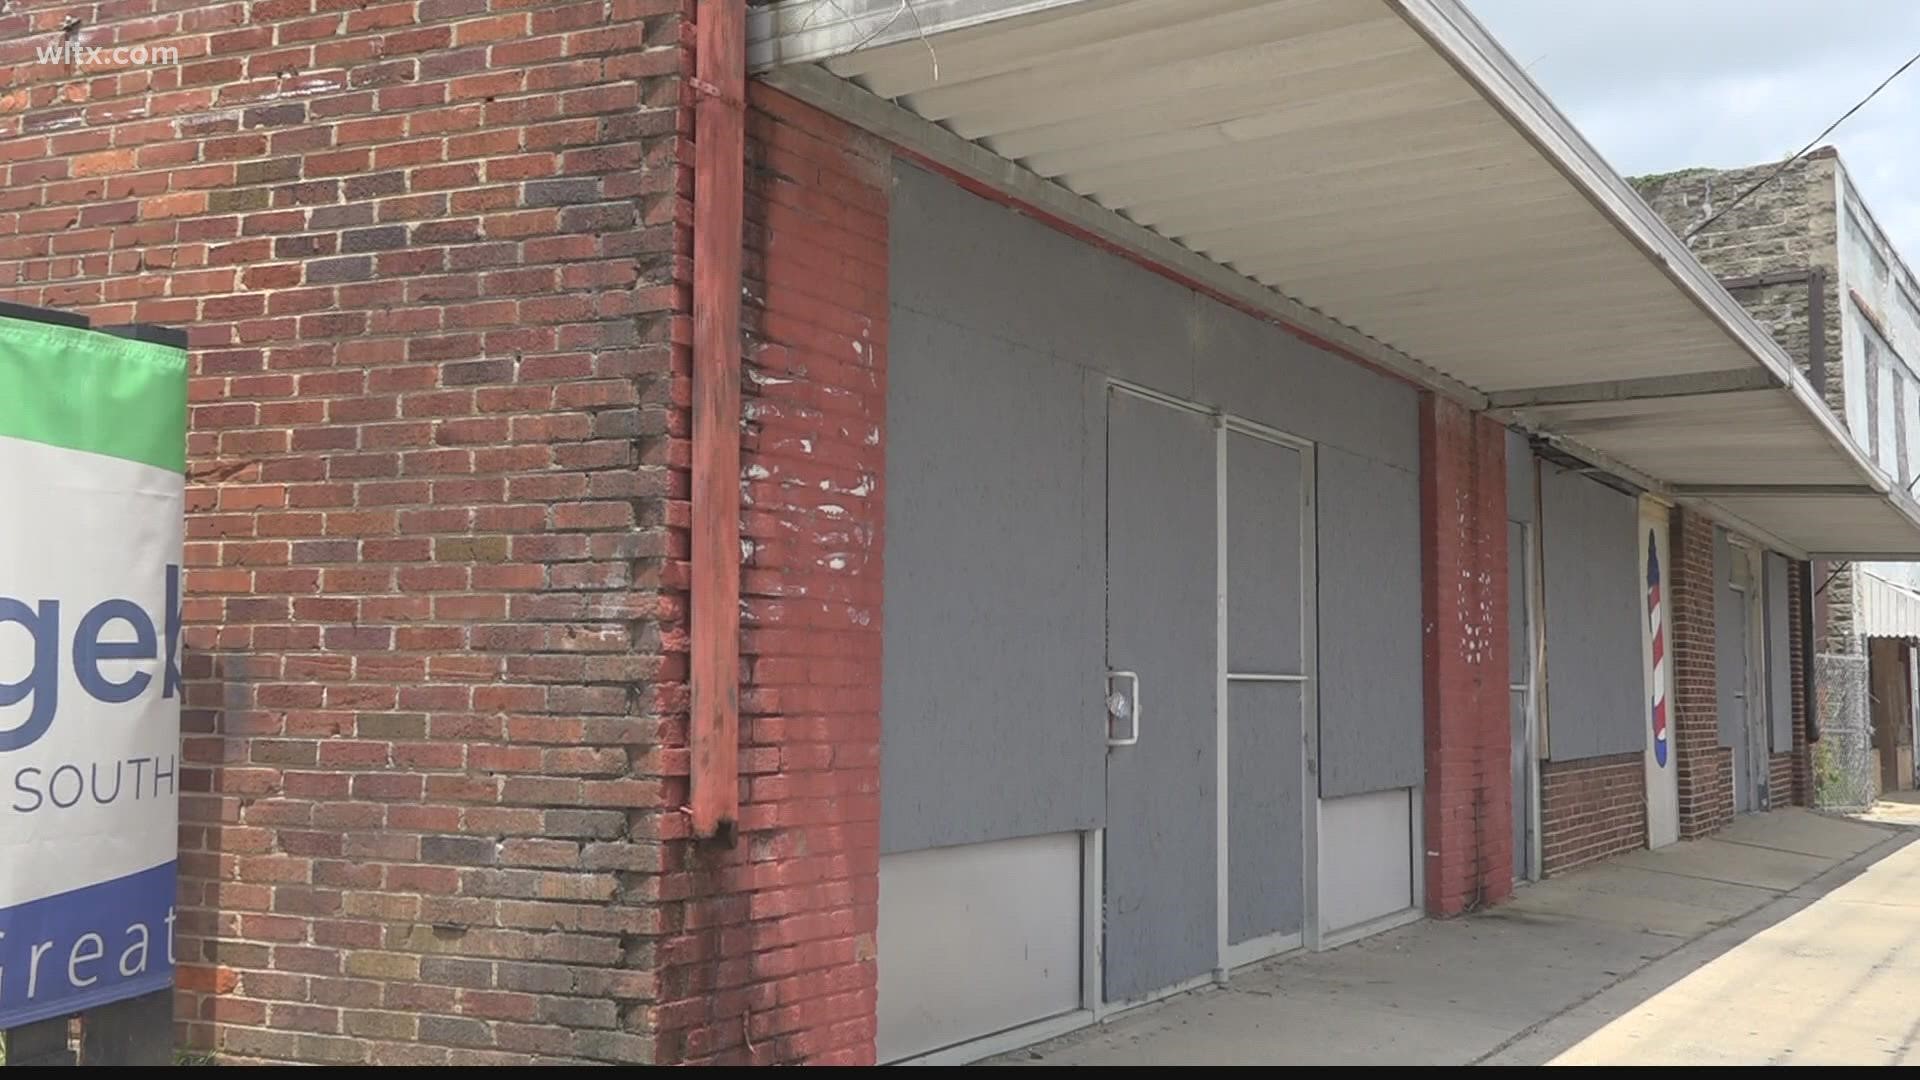 The City of Orangeburg will soon receive federal funds to transform its State Theater into a civil rights museum.